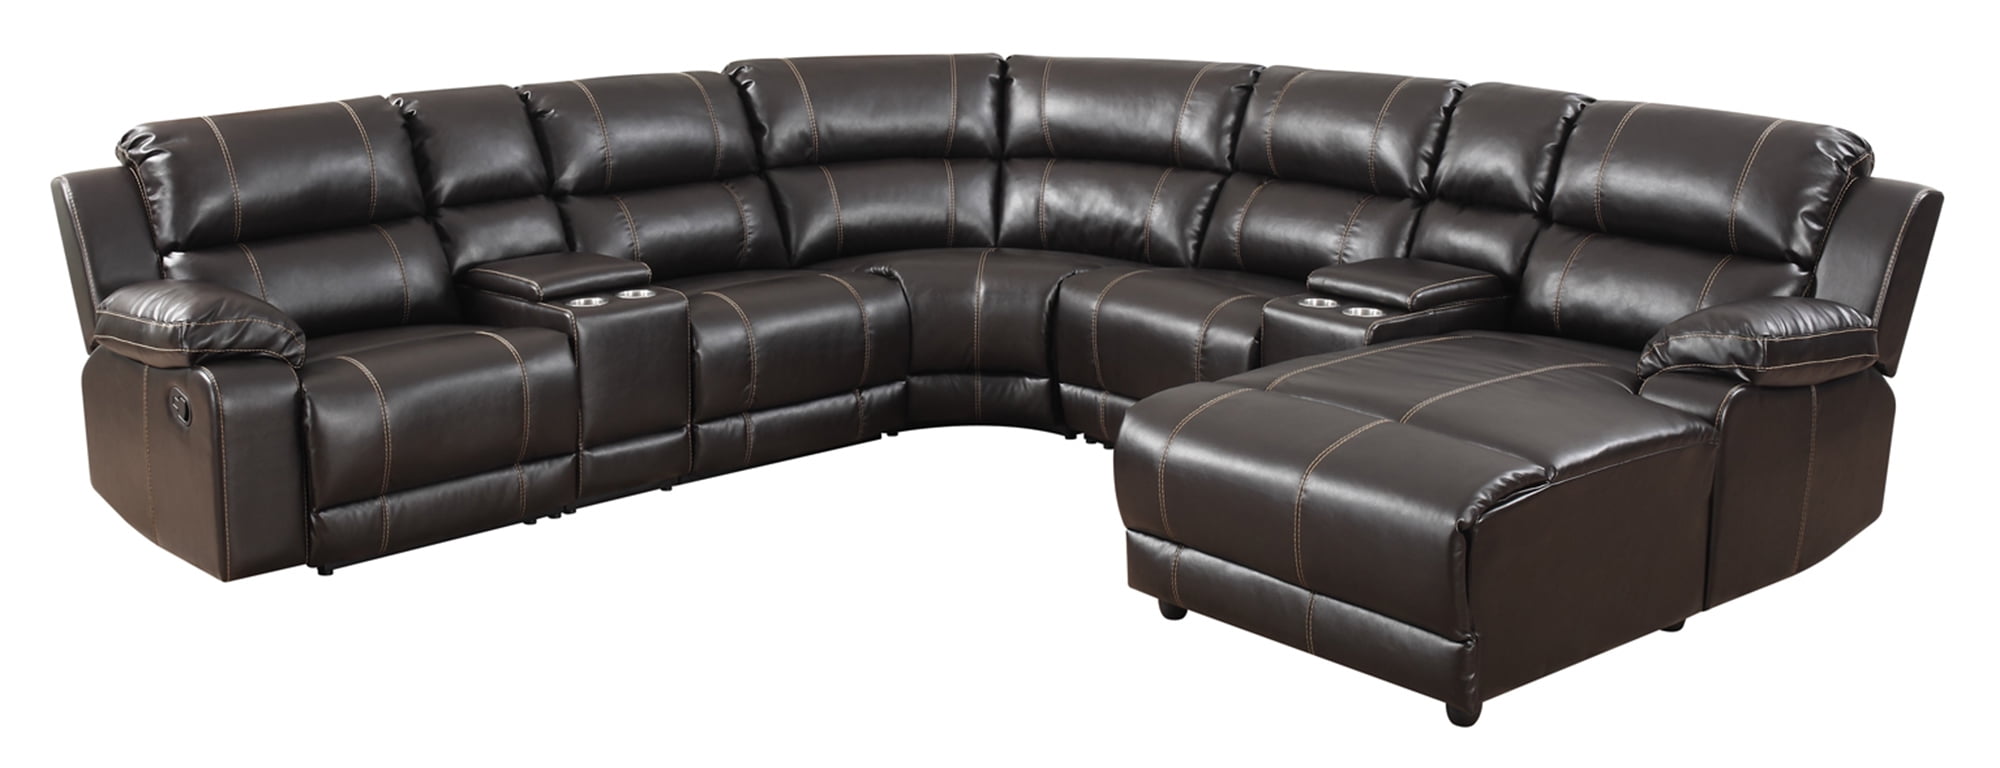 gino sectional leather sofa